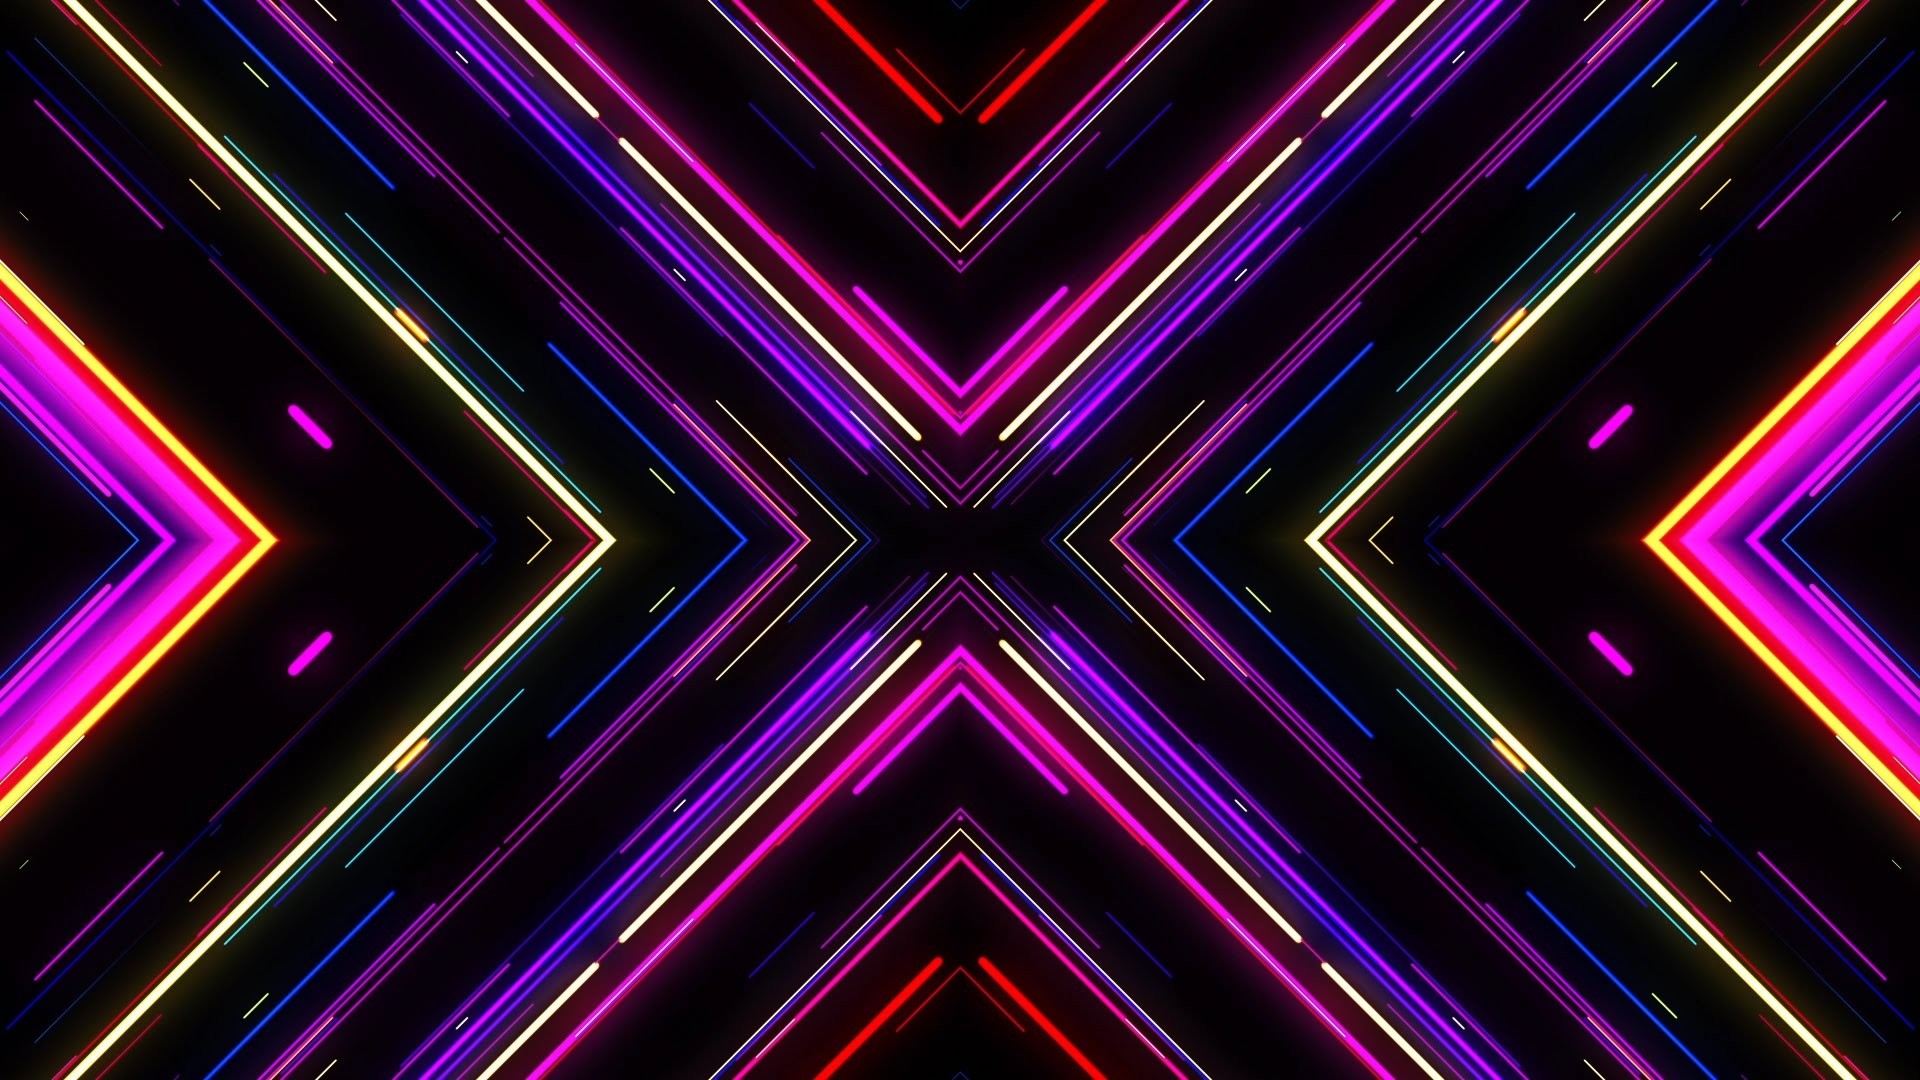  Neon background    Download free awesome backgrounds  for 